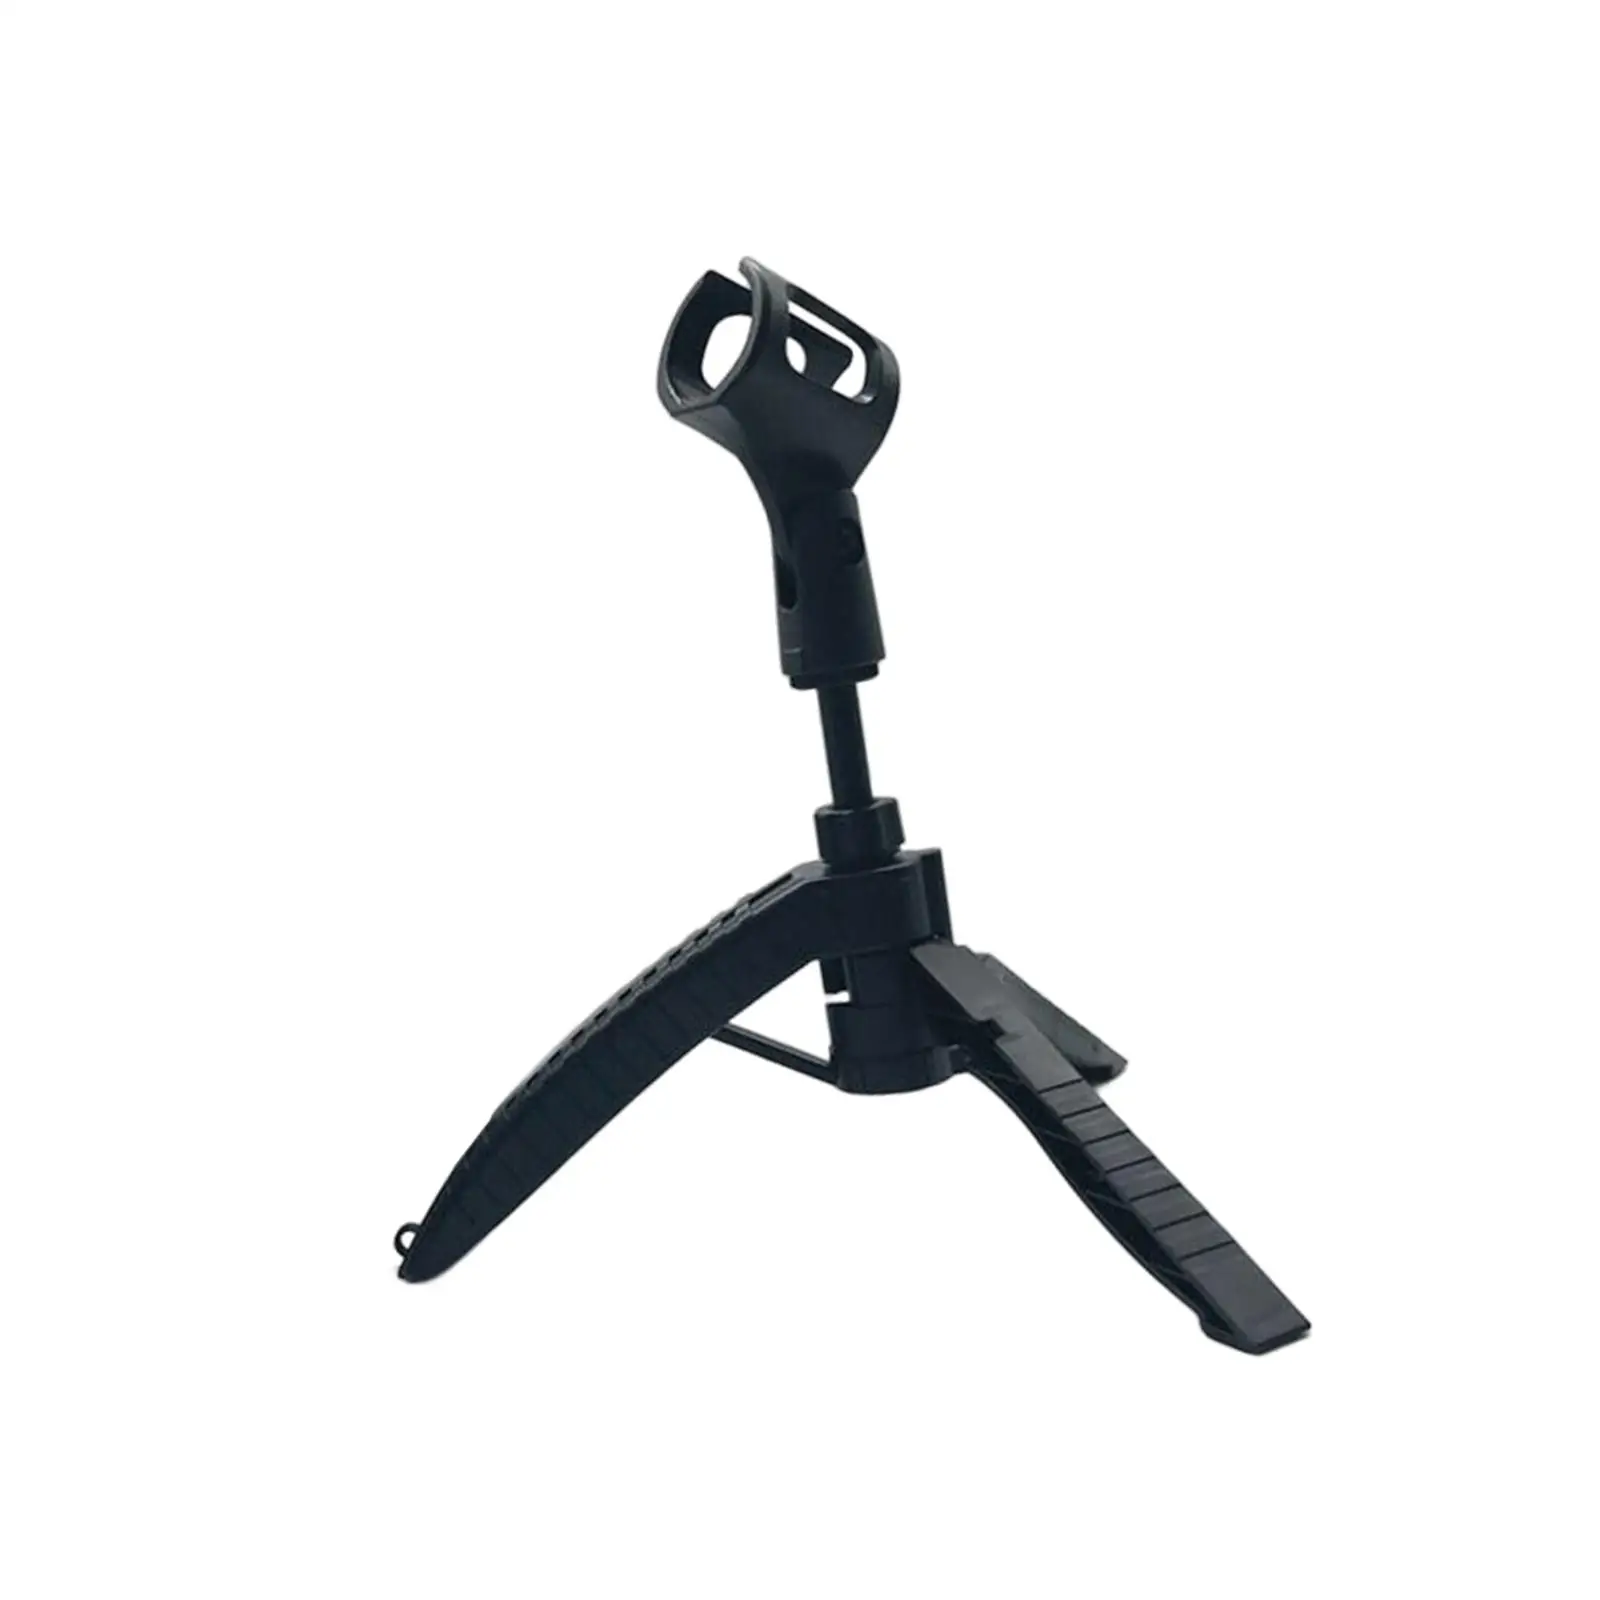 Foldable Microphone Tripod Heavy Duty Portable Tabletop Mic Stand Holder for Broadcasting Conferences Screencasts Lectures Home